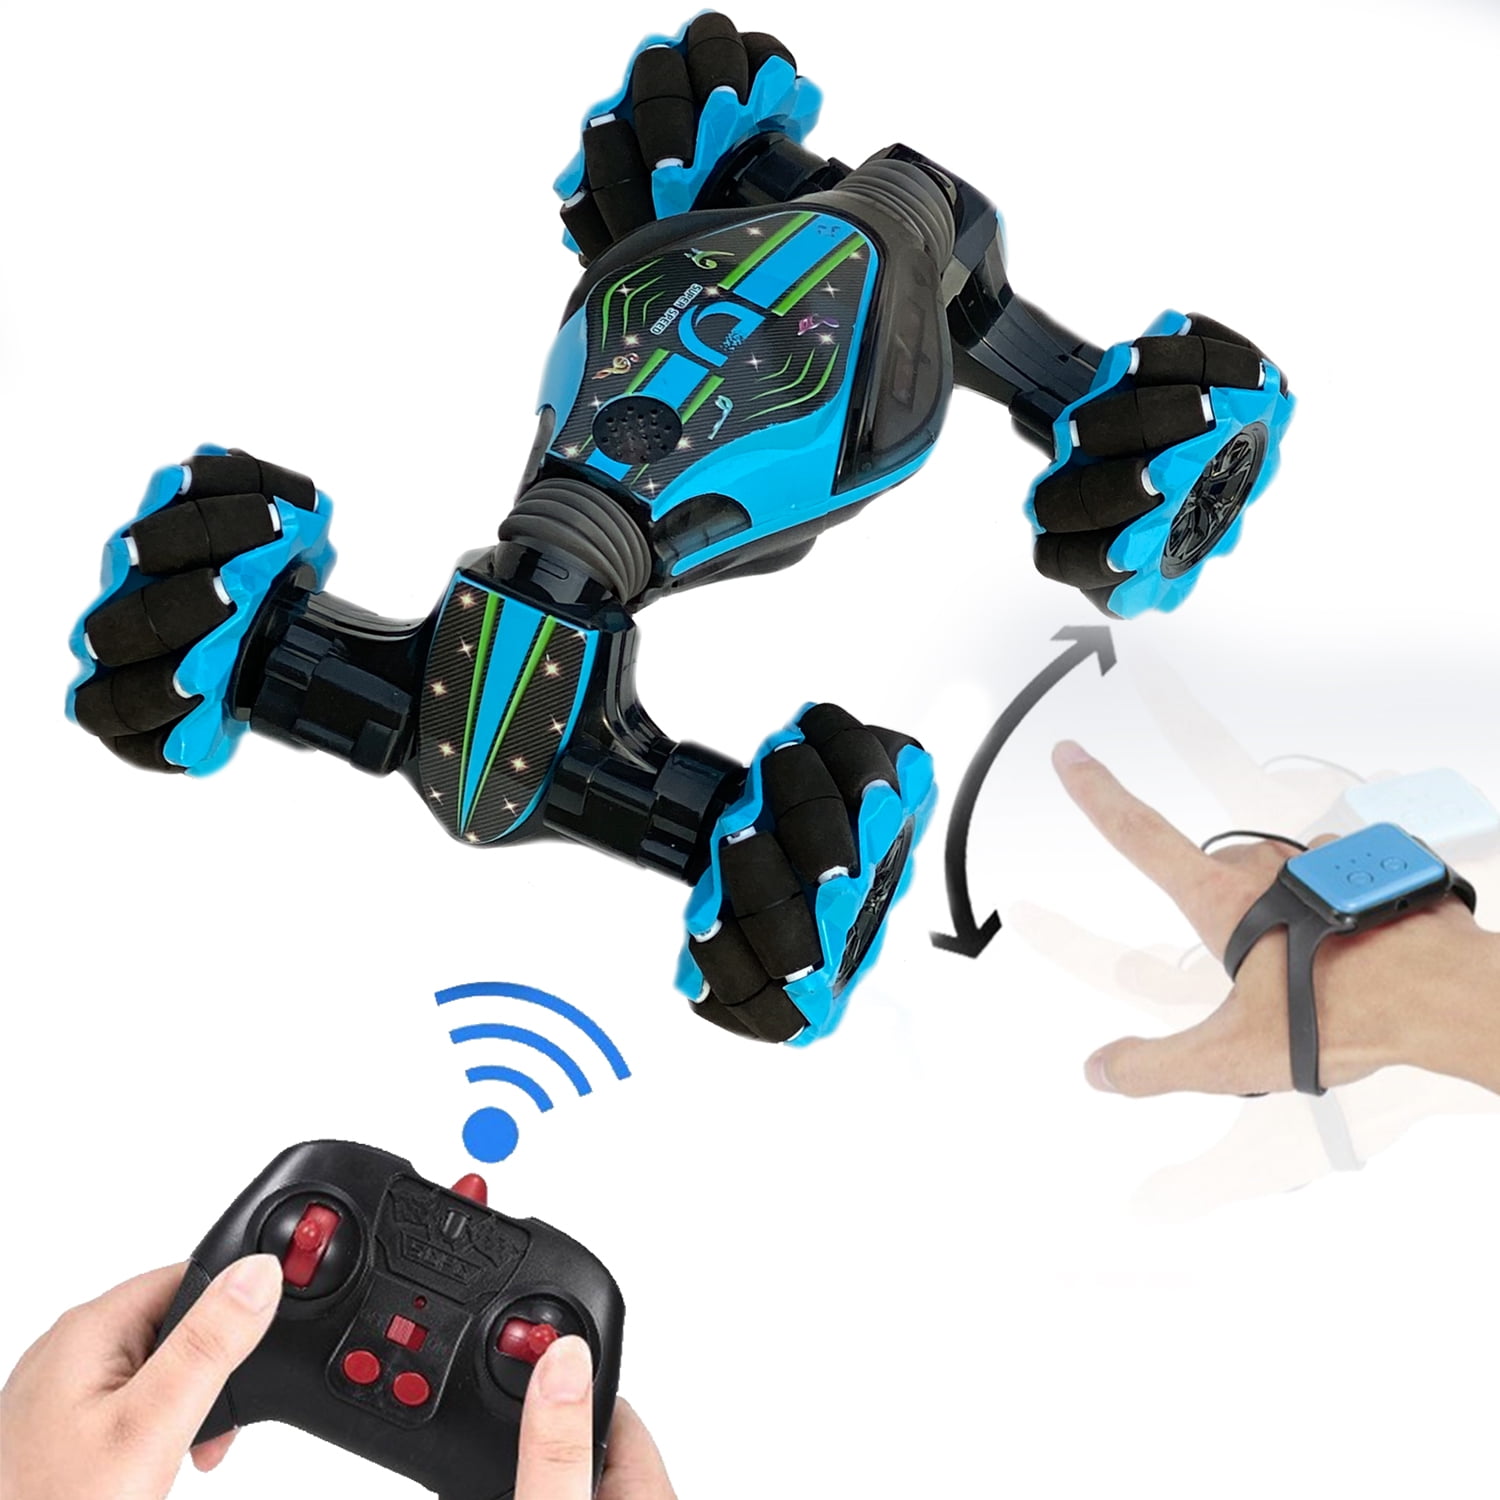 Details about   Kids 2.4G Remote Control Super Mini High-Speed Motor Outdoor RC Racing Toy 